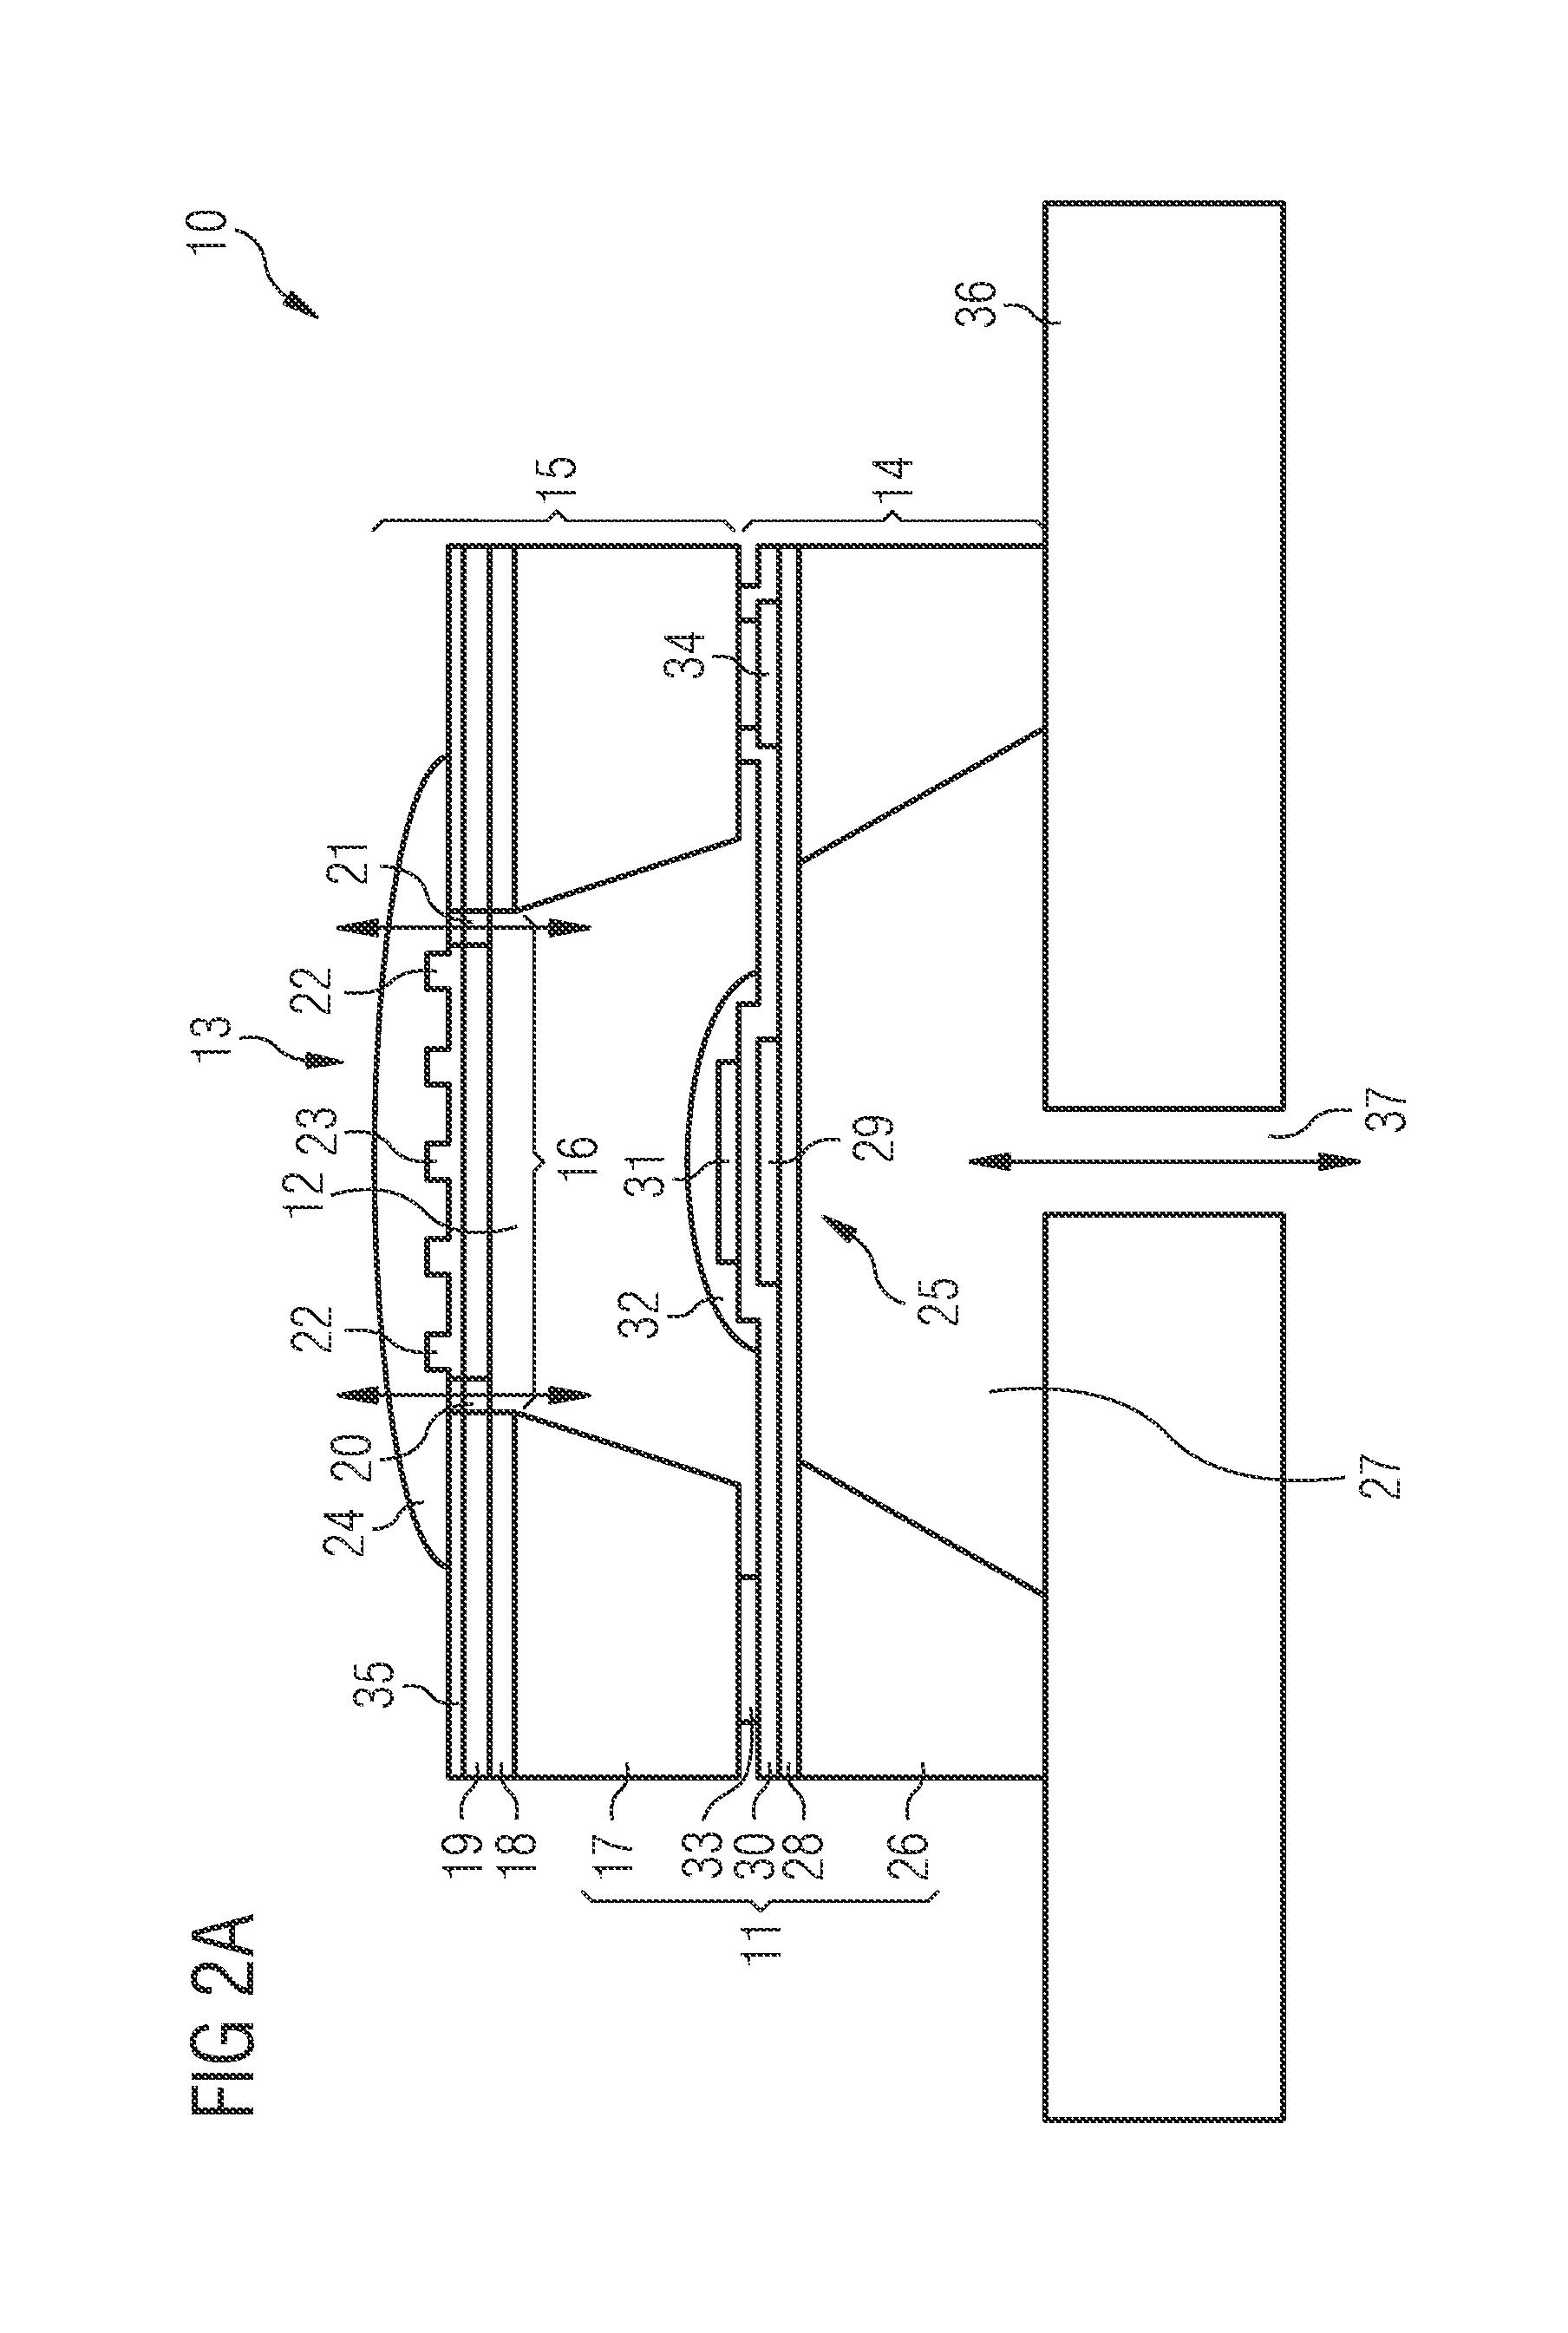 Method and sensor system for measuring gas concentrations